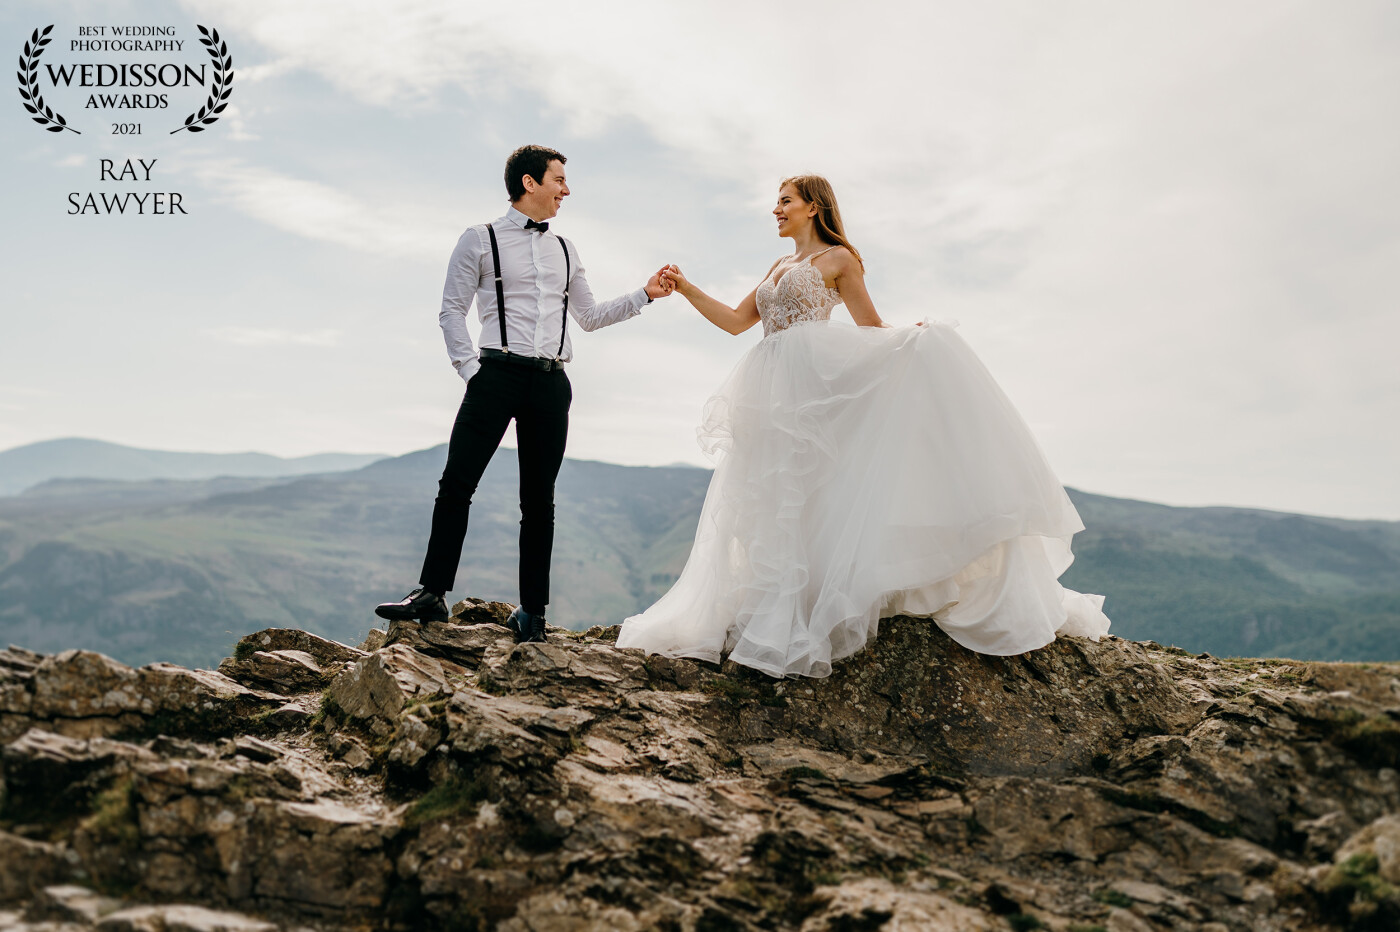 Ah man, I love the Lake District, I love my wedding couples, I love photography - Put it all together on an Adventure Session and you get perfection - The weather that days was amazing too. What a day.